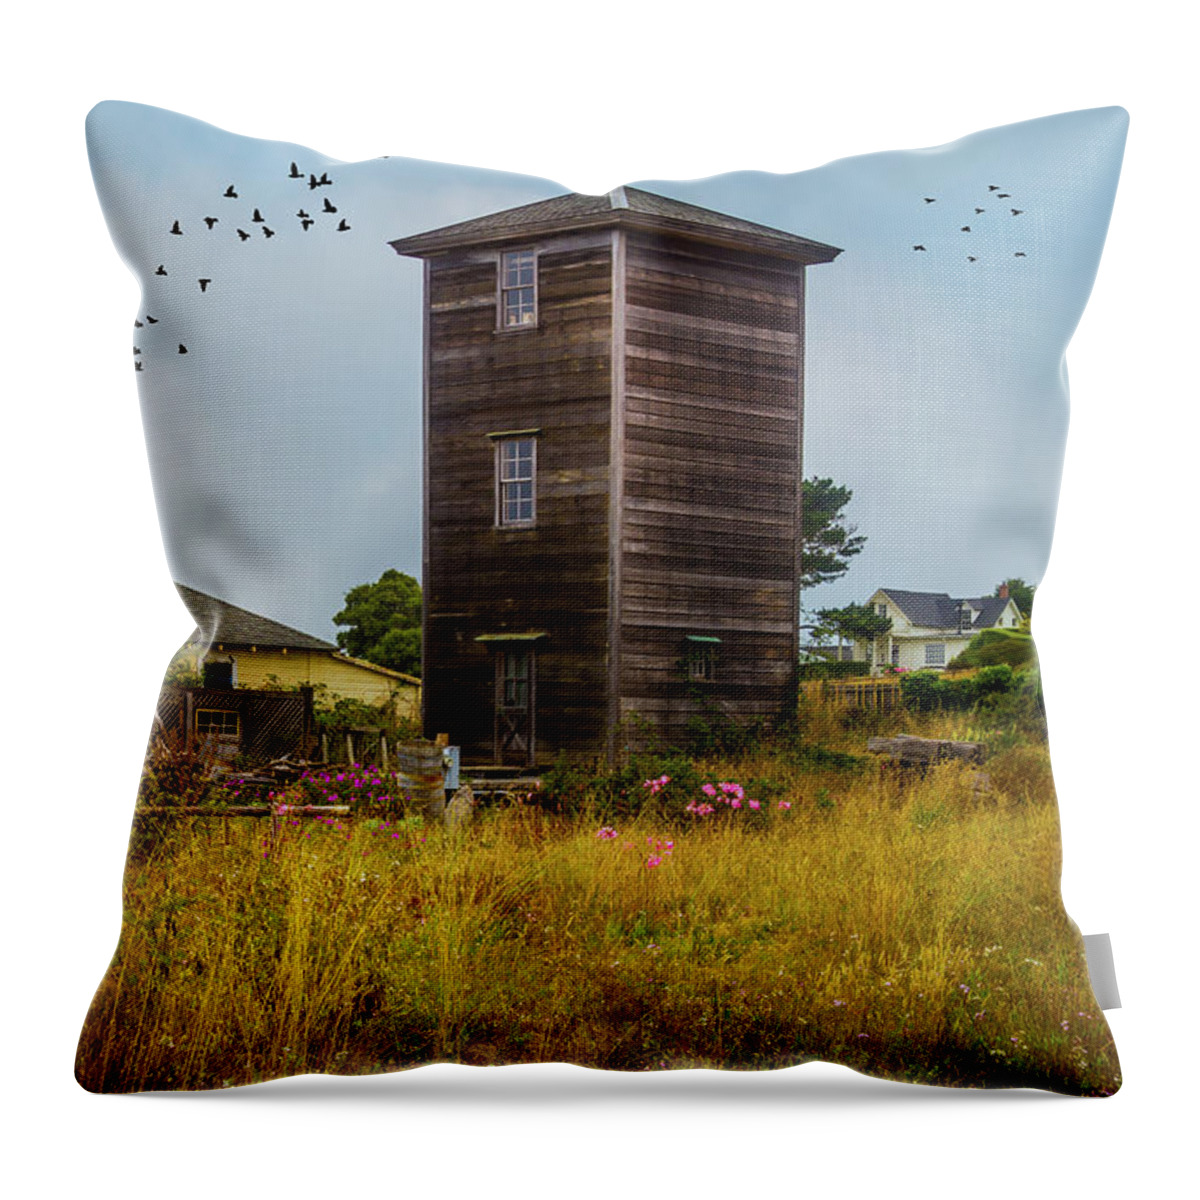 Mendocino Throw Pillow featuring the photograph Tower Mendocino by Garry Gay